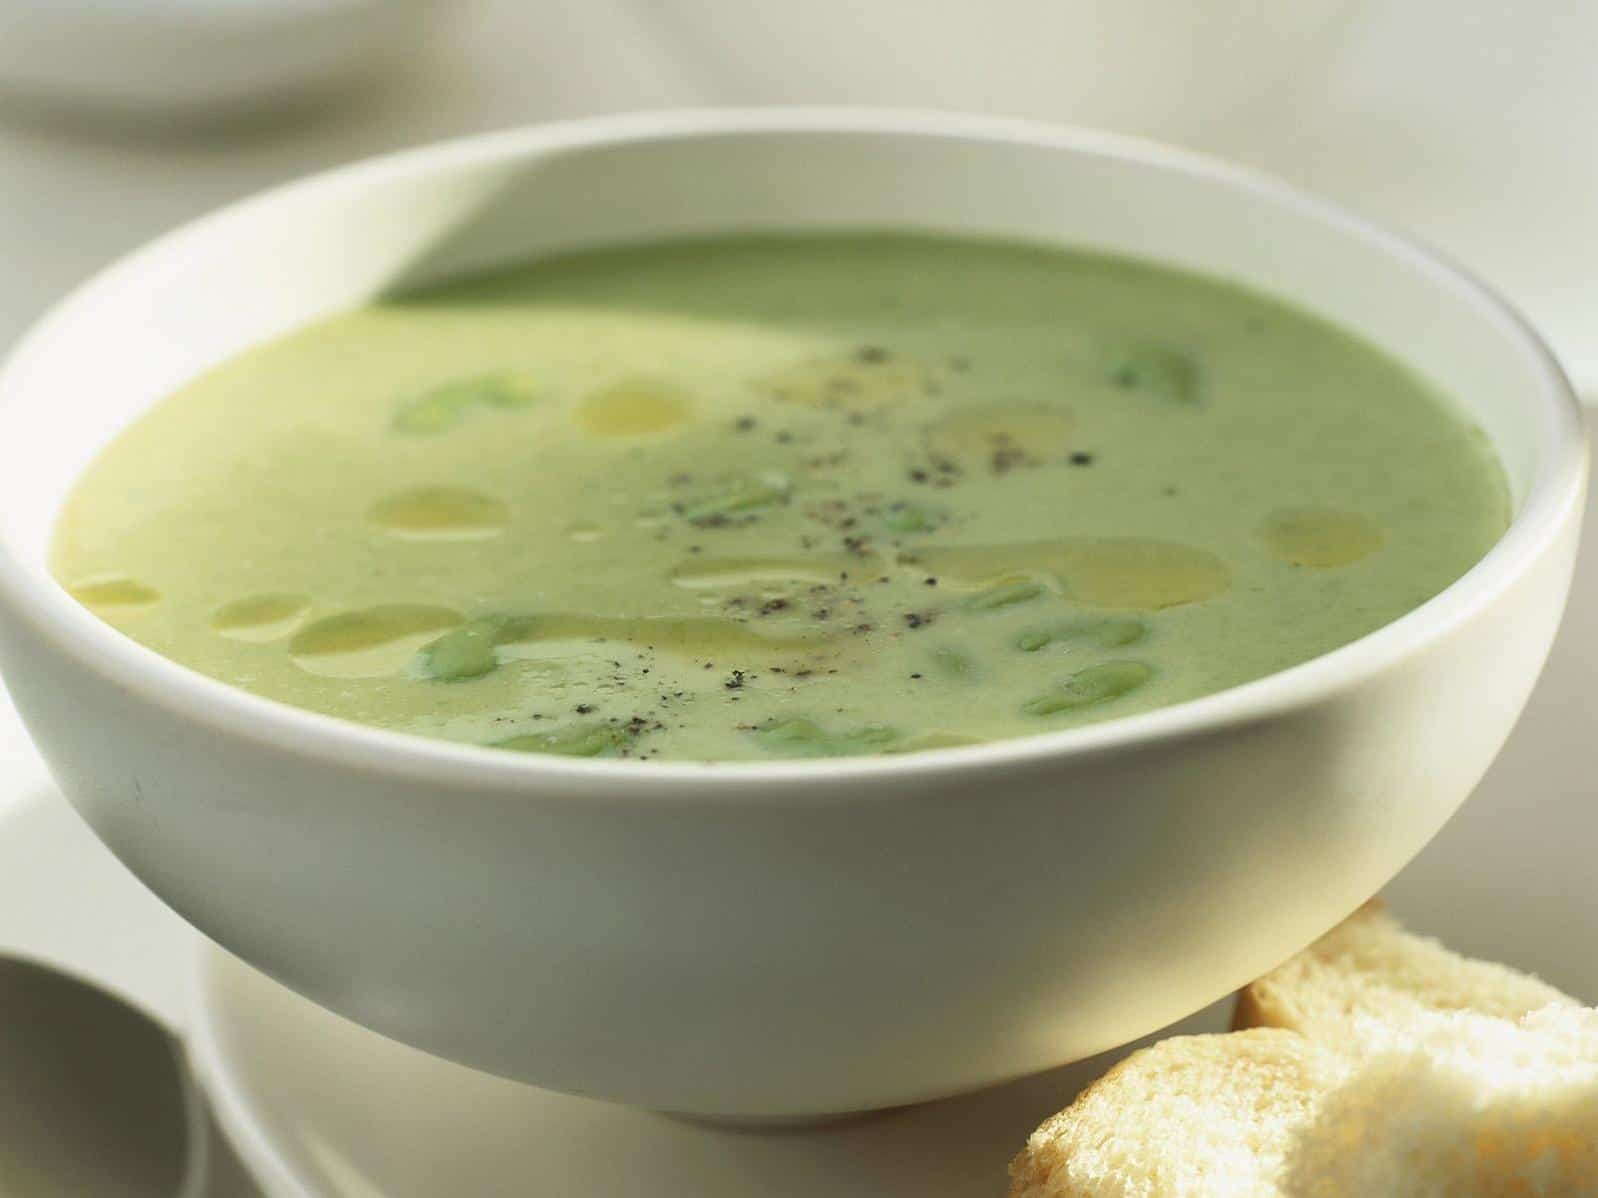  Who knew green beans could be transformed into such a delicious and healthy soup?